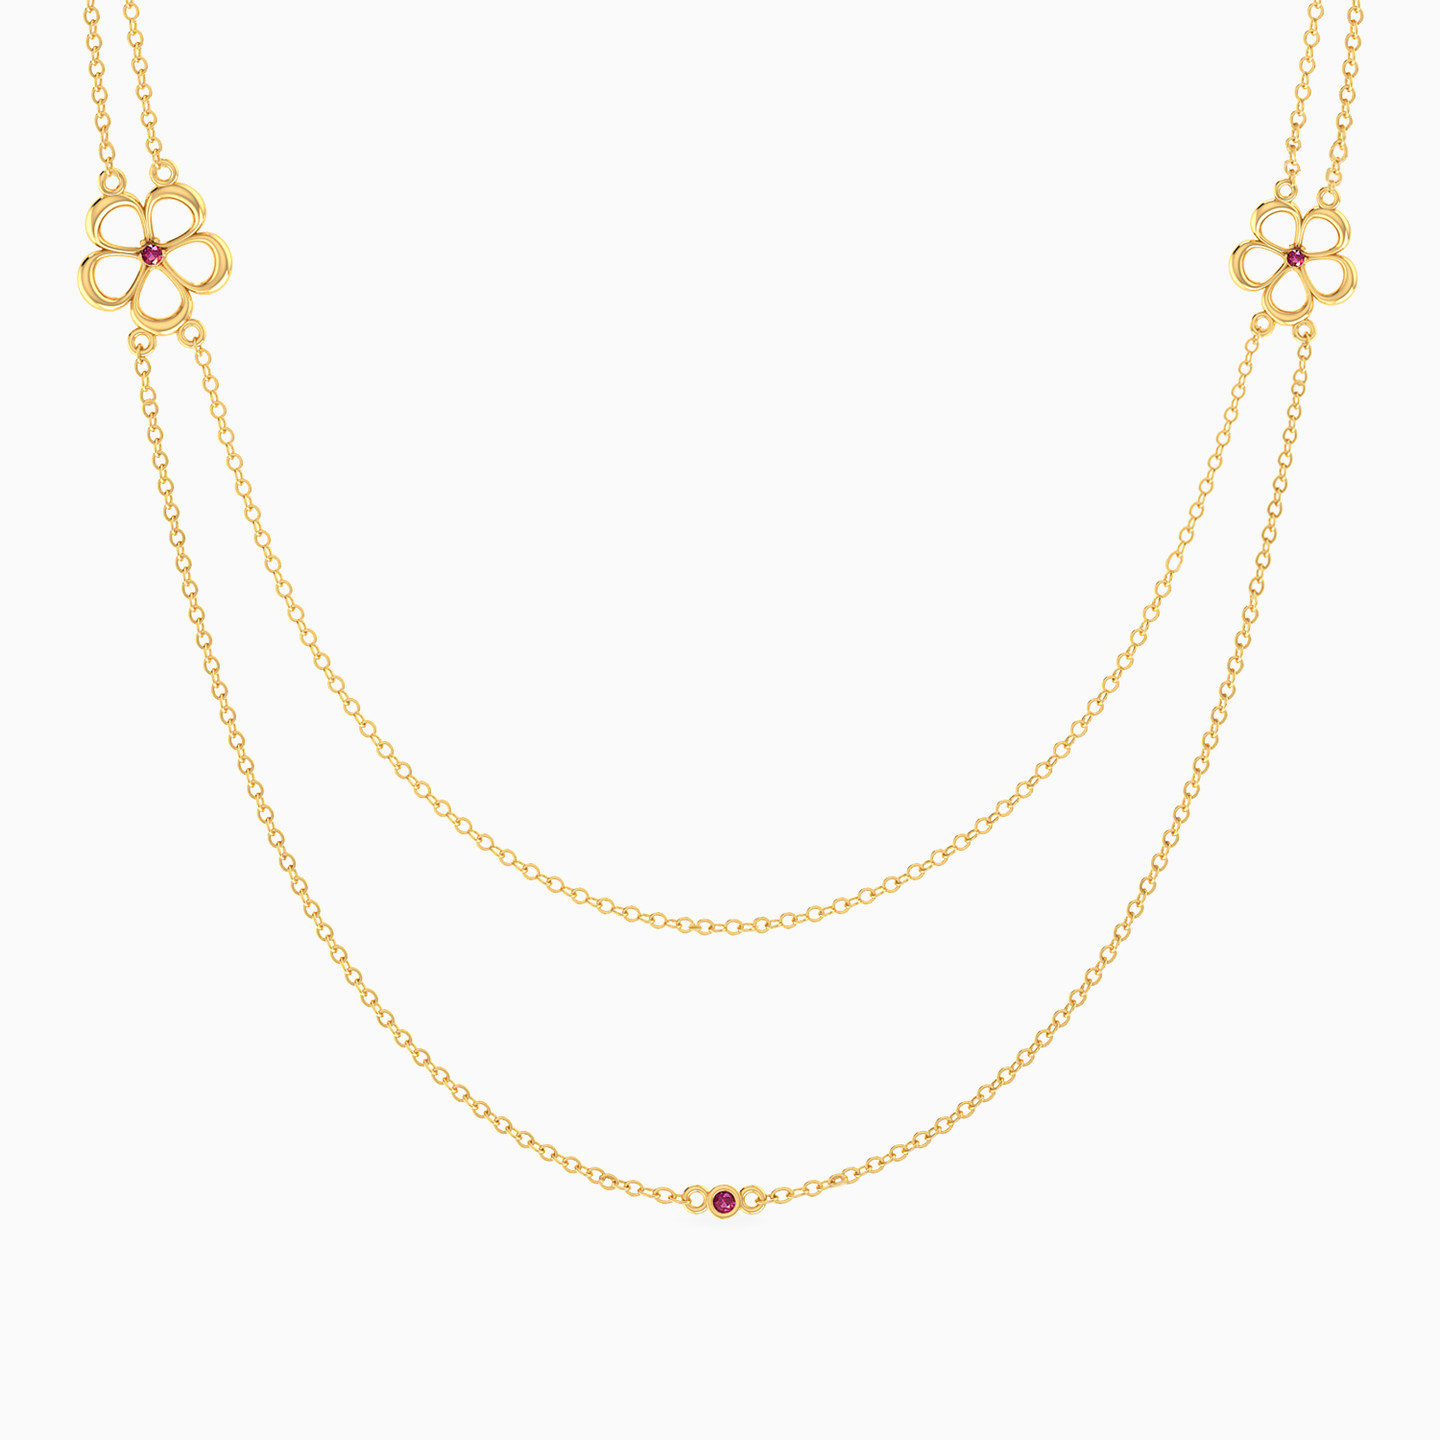 Flower Shaped Colored Stones Layered Necklace 18K Gold Chain